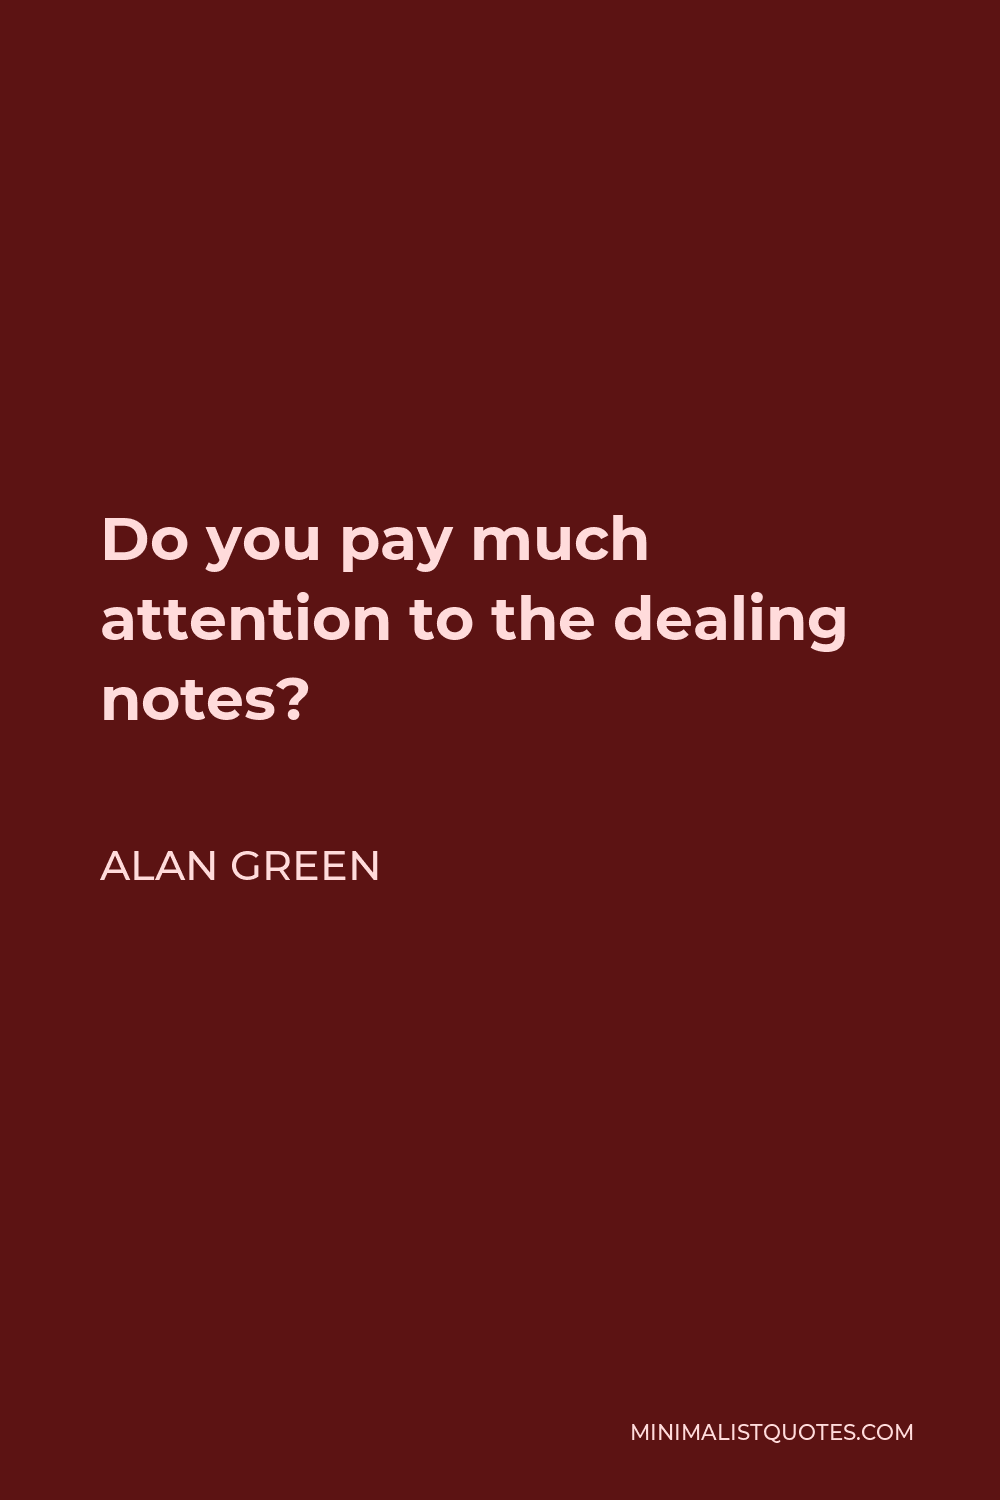 Alan Green Quote - Do you pay much attention to the dealing notes?